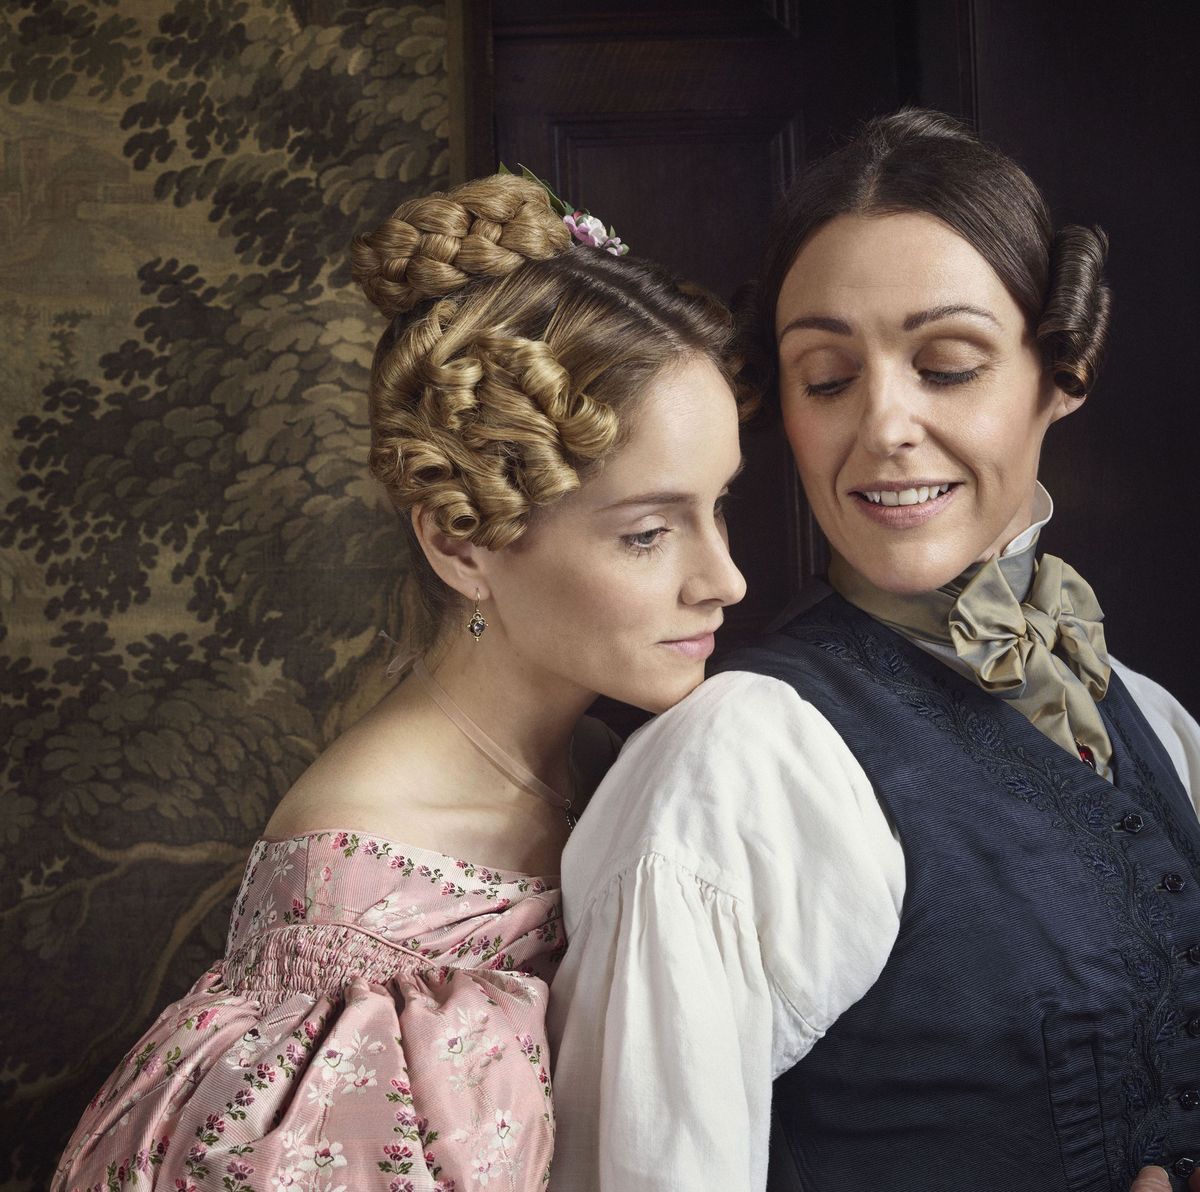 Gentleman Jack season 2 release date, cast - all you need to know